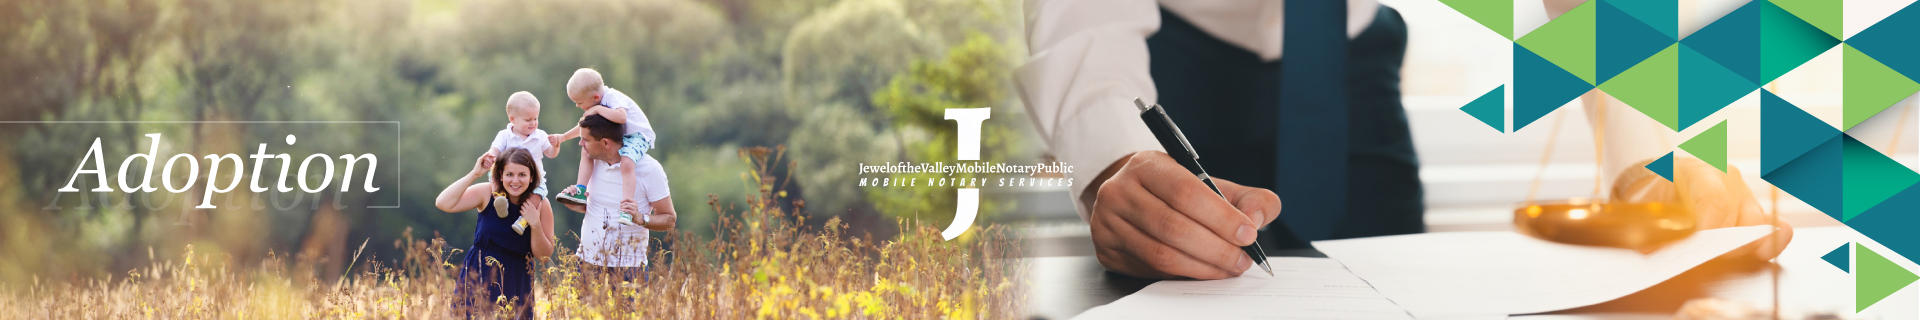 Slider - Jewel of the Valley Mobile Notary Public